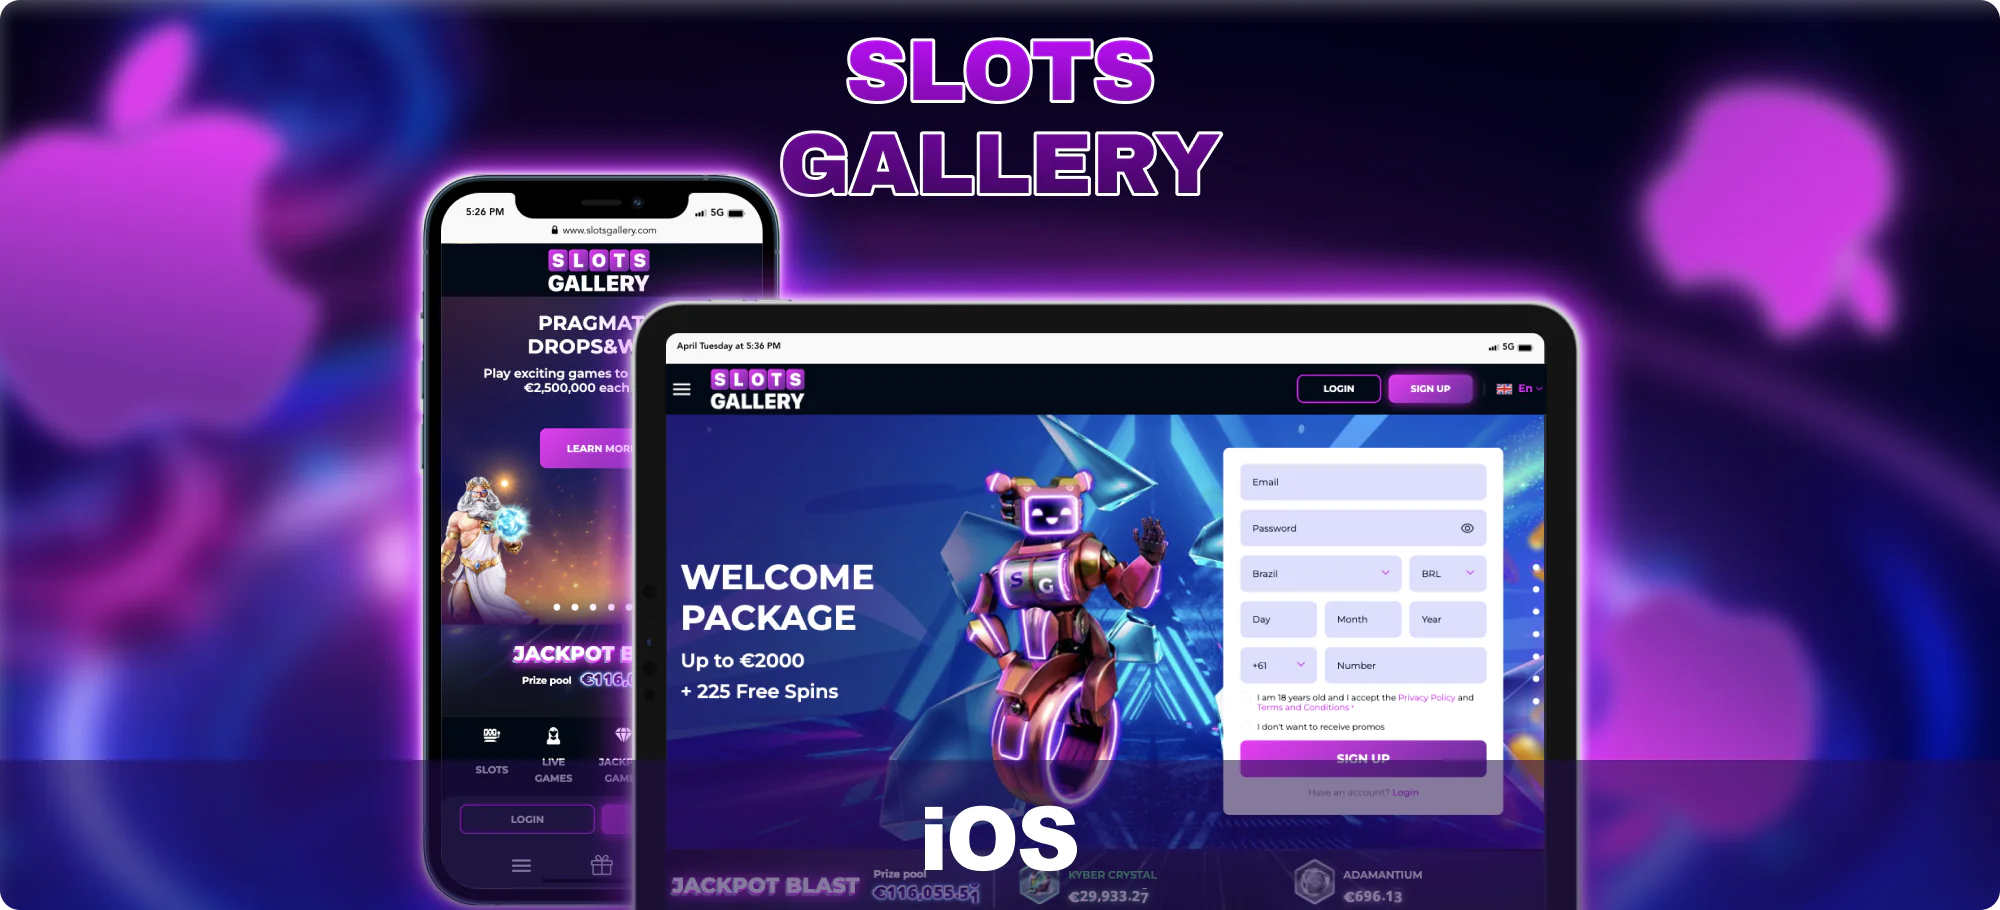 iOS compatible devices for players - Slots Gallery